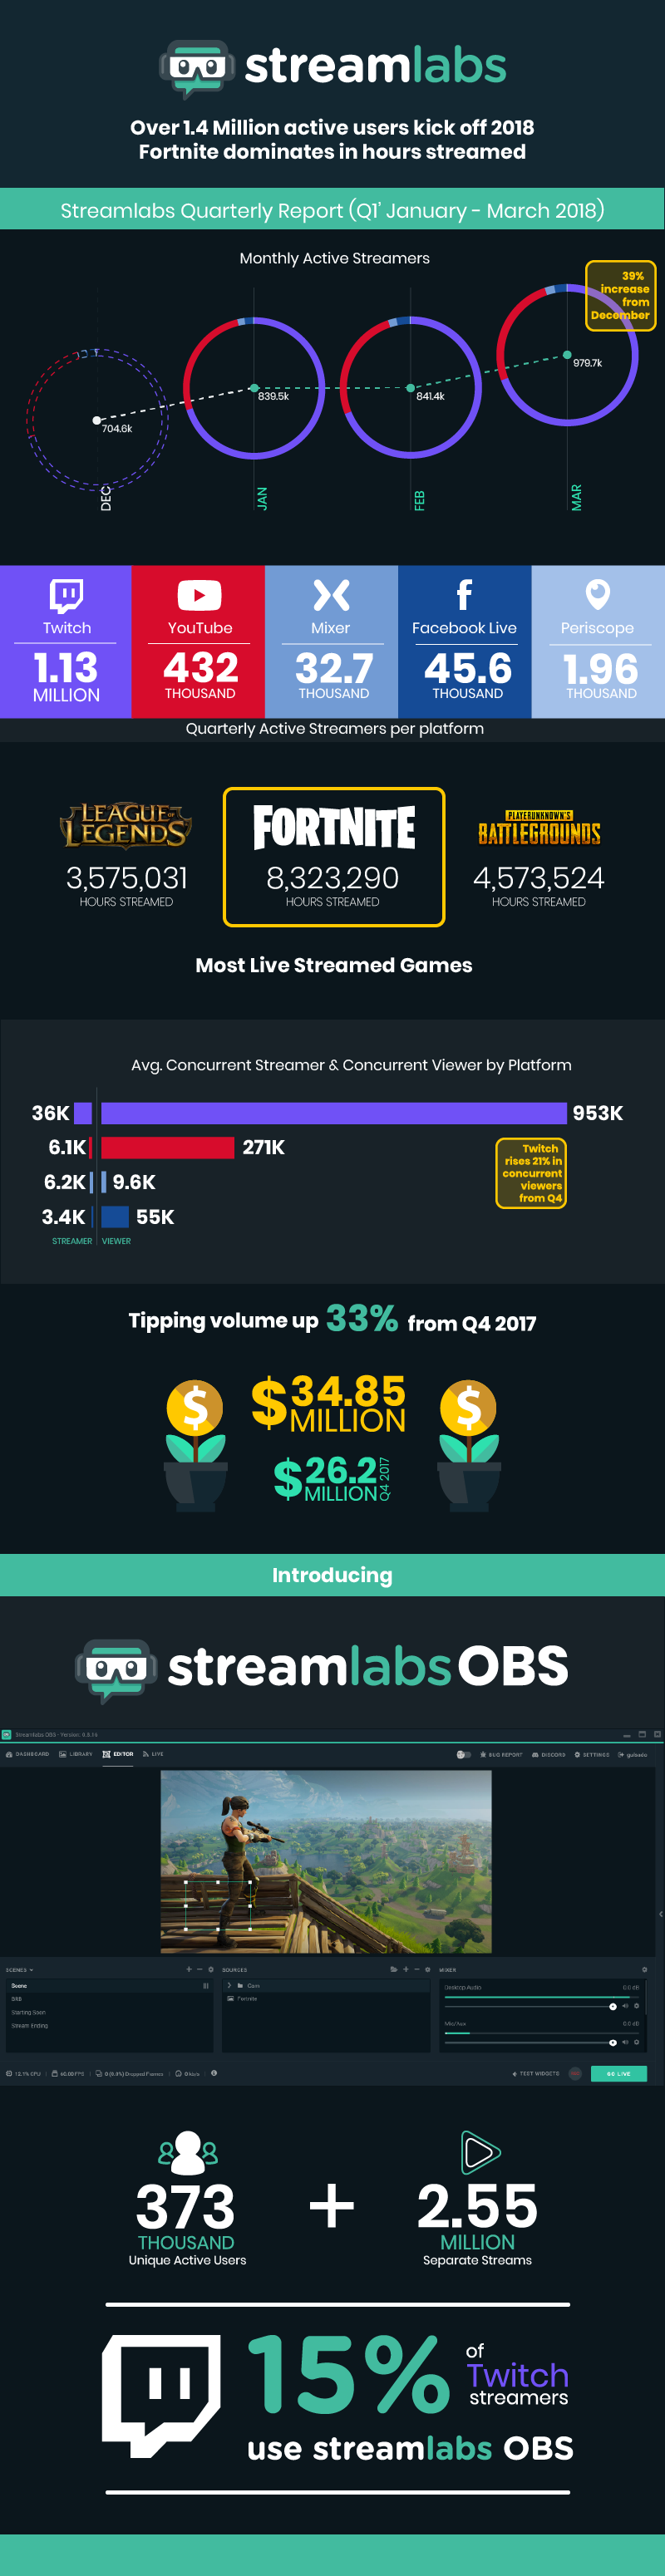 tipping up 33 twitch viewers up 21 fortnite dominates q1 18 streamlabs report - fortnite hours watched on twitch